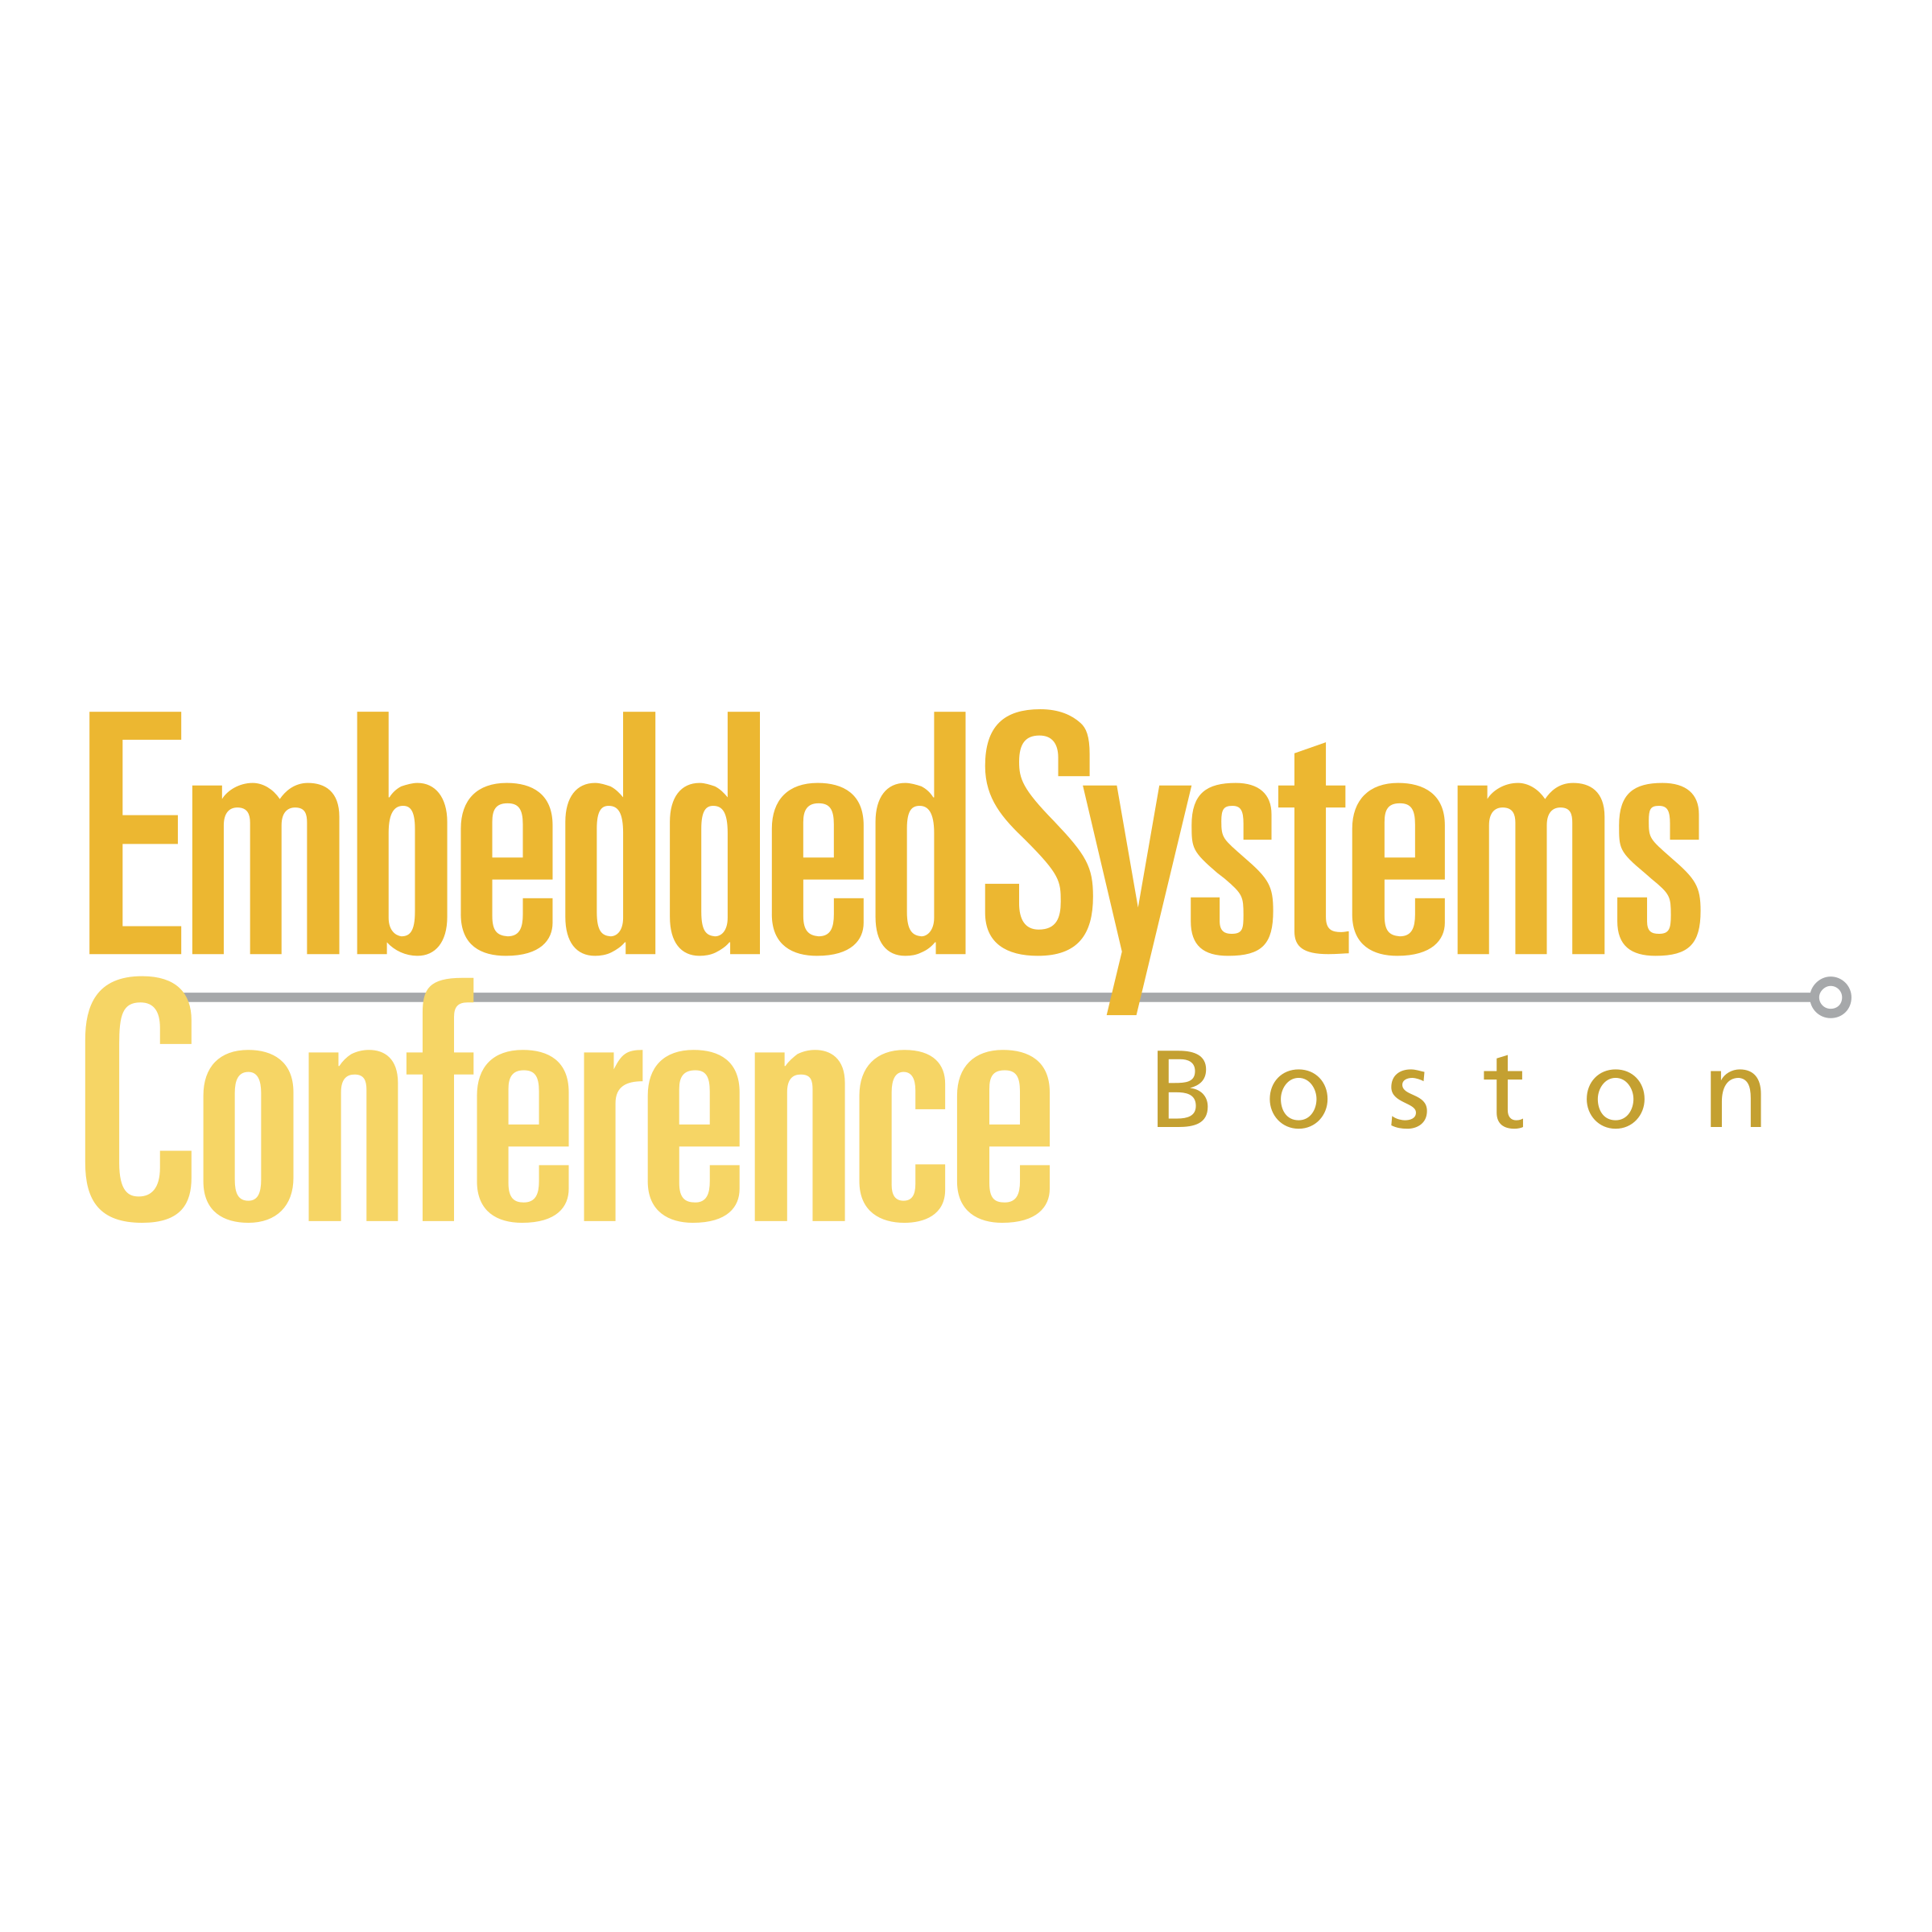 embedded-systems-conference-logo-png-transparent